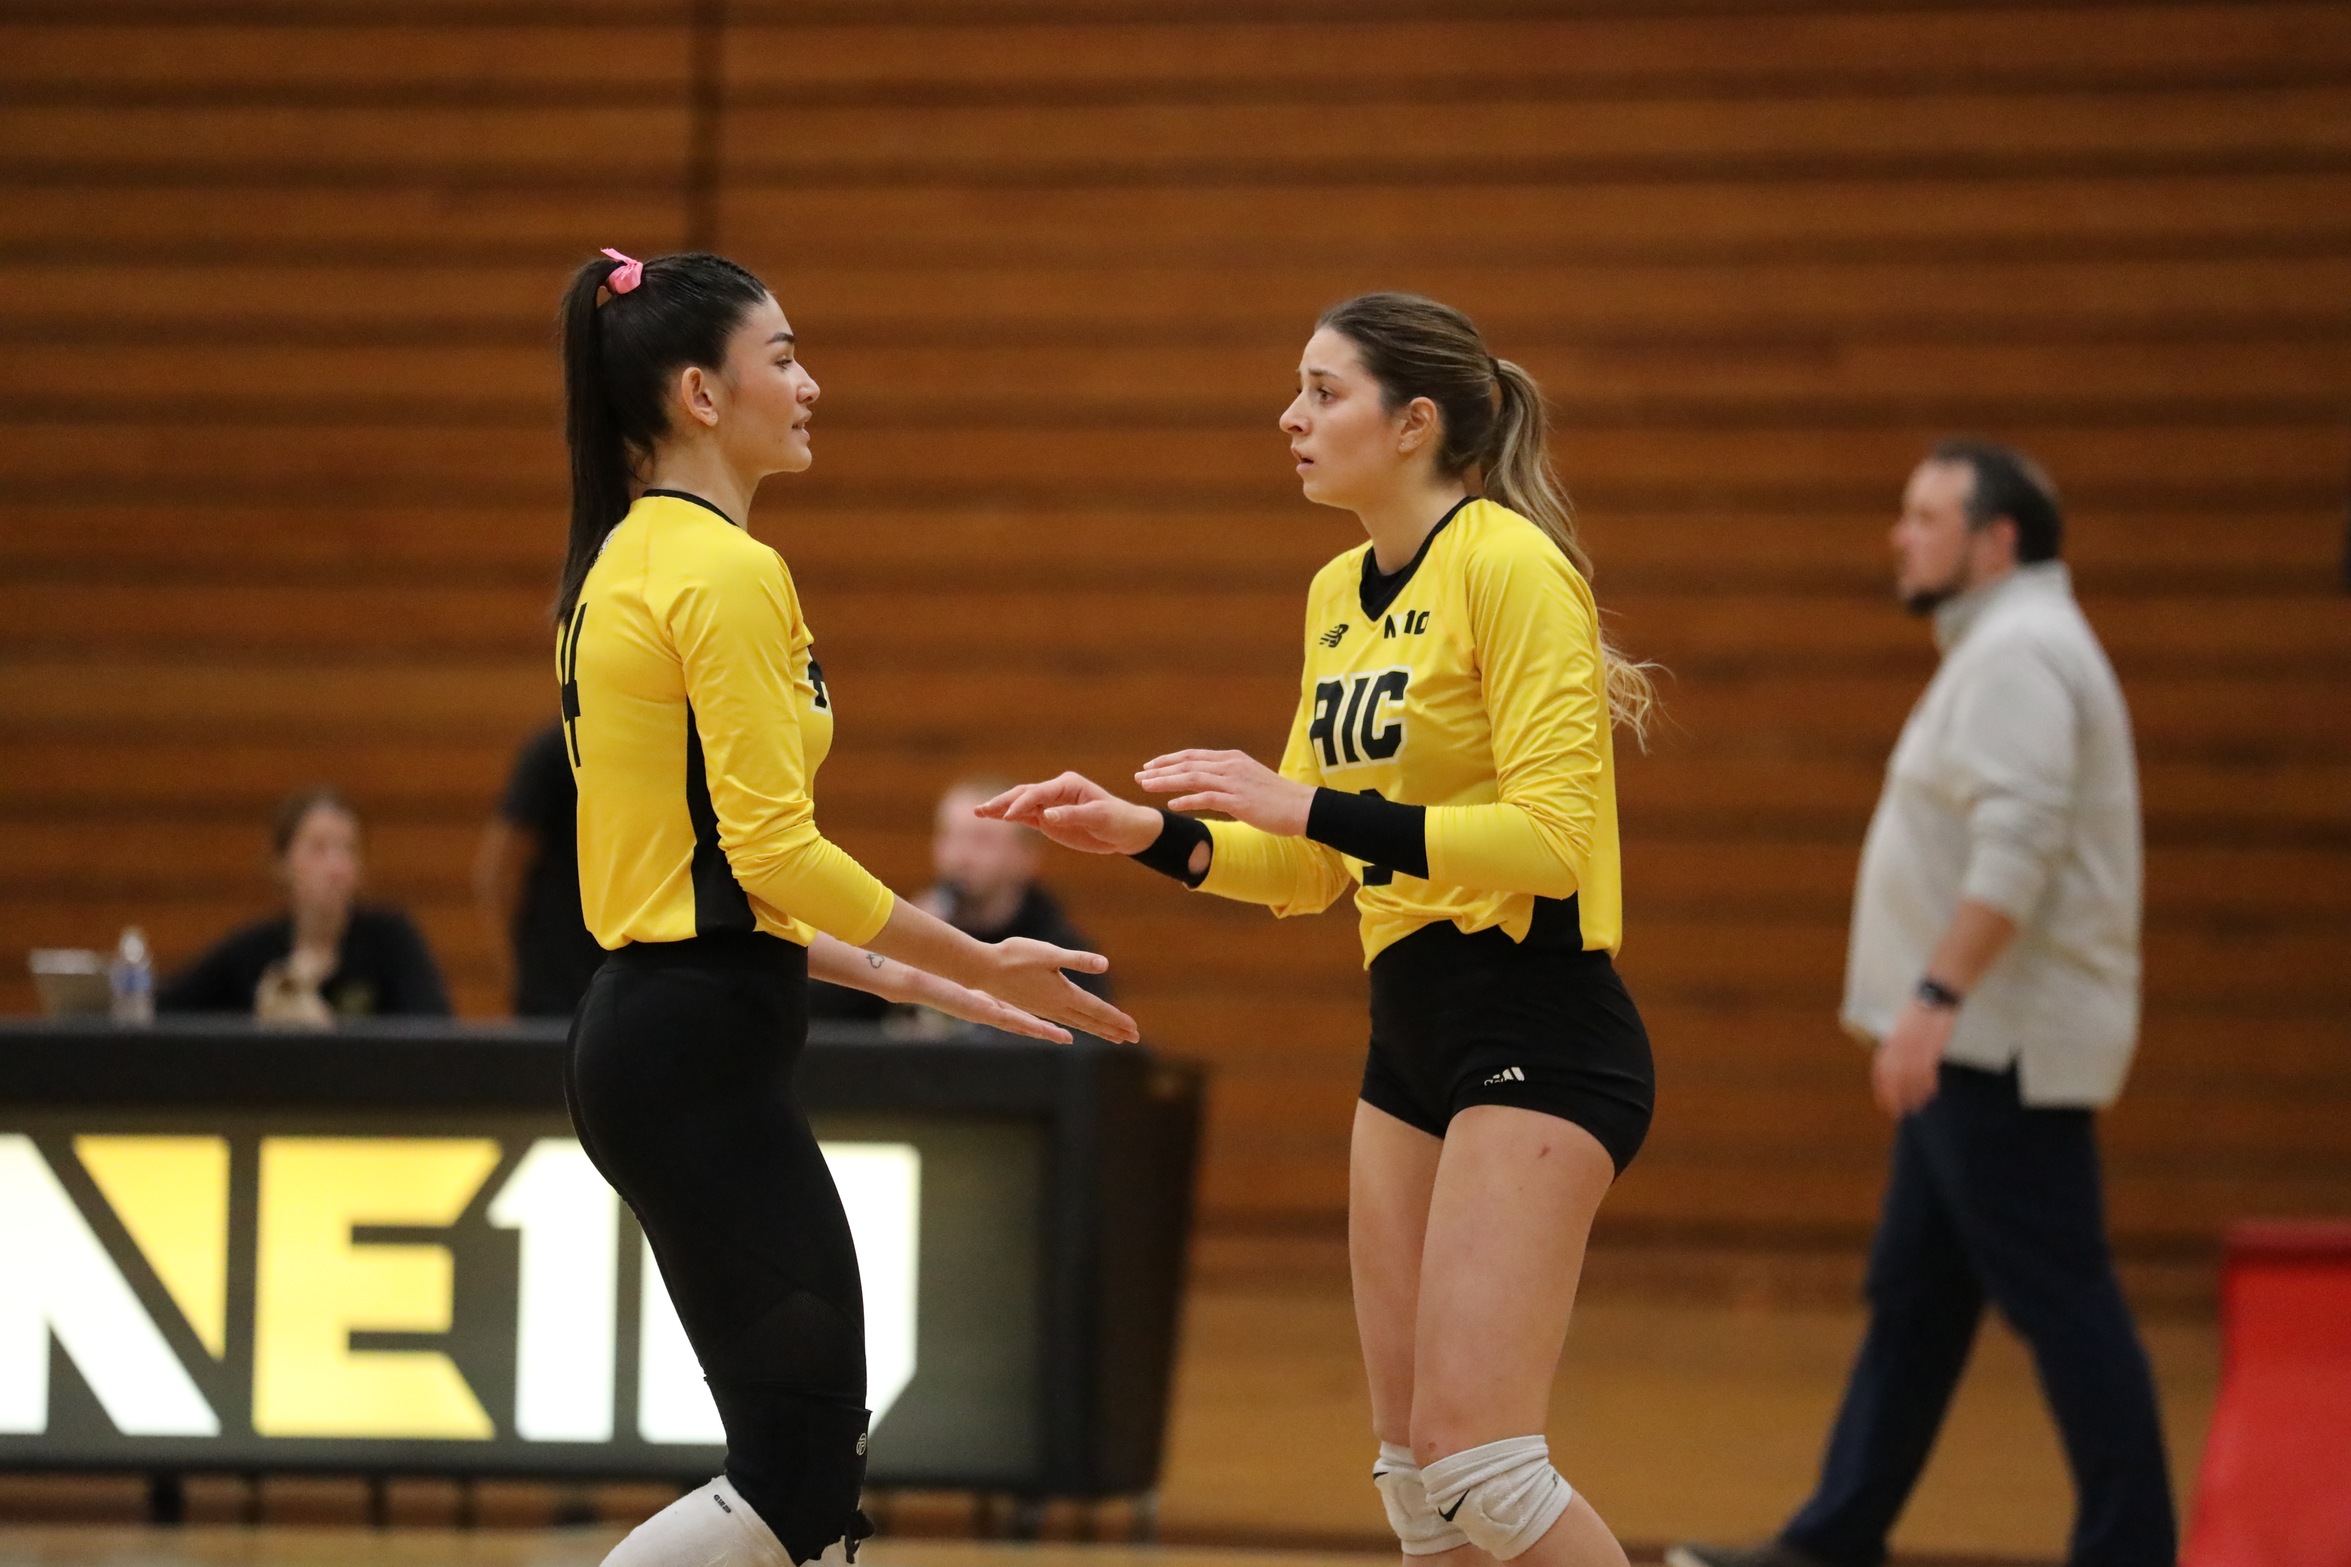 Women's Volleyball sweeps Assumption to earn Senior Night win